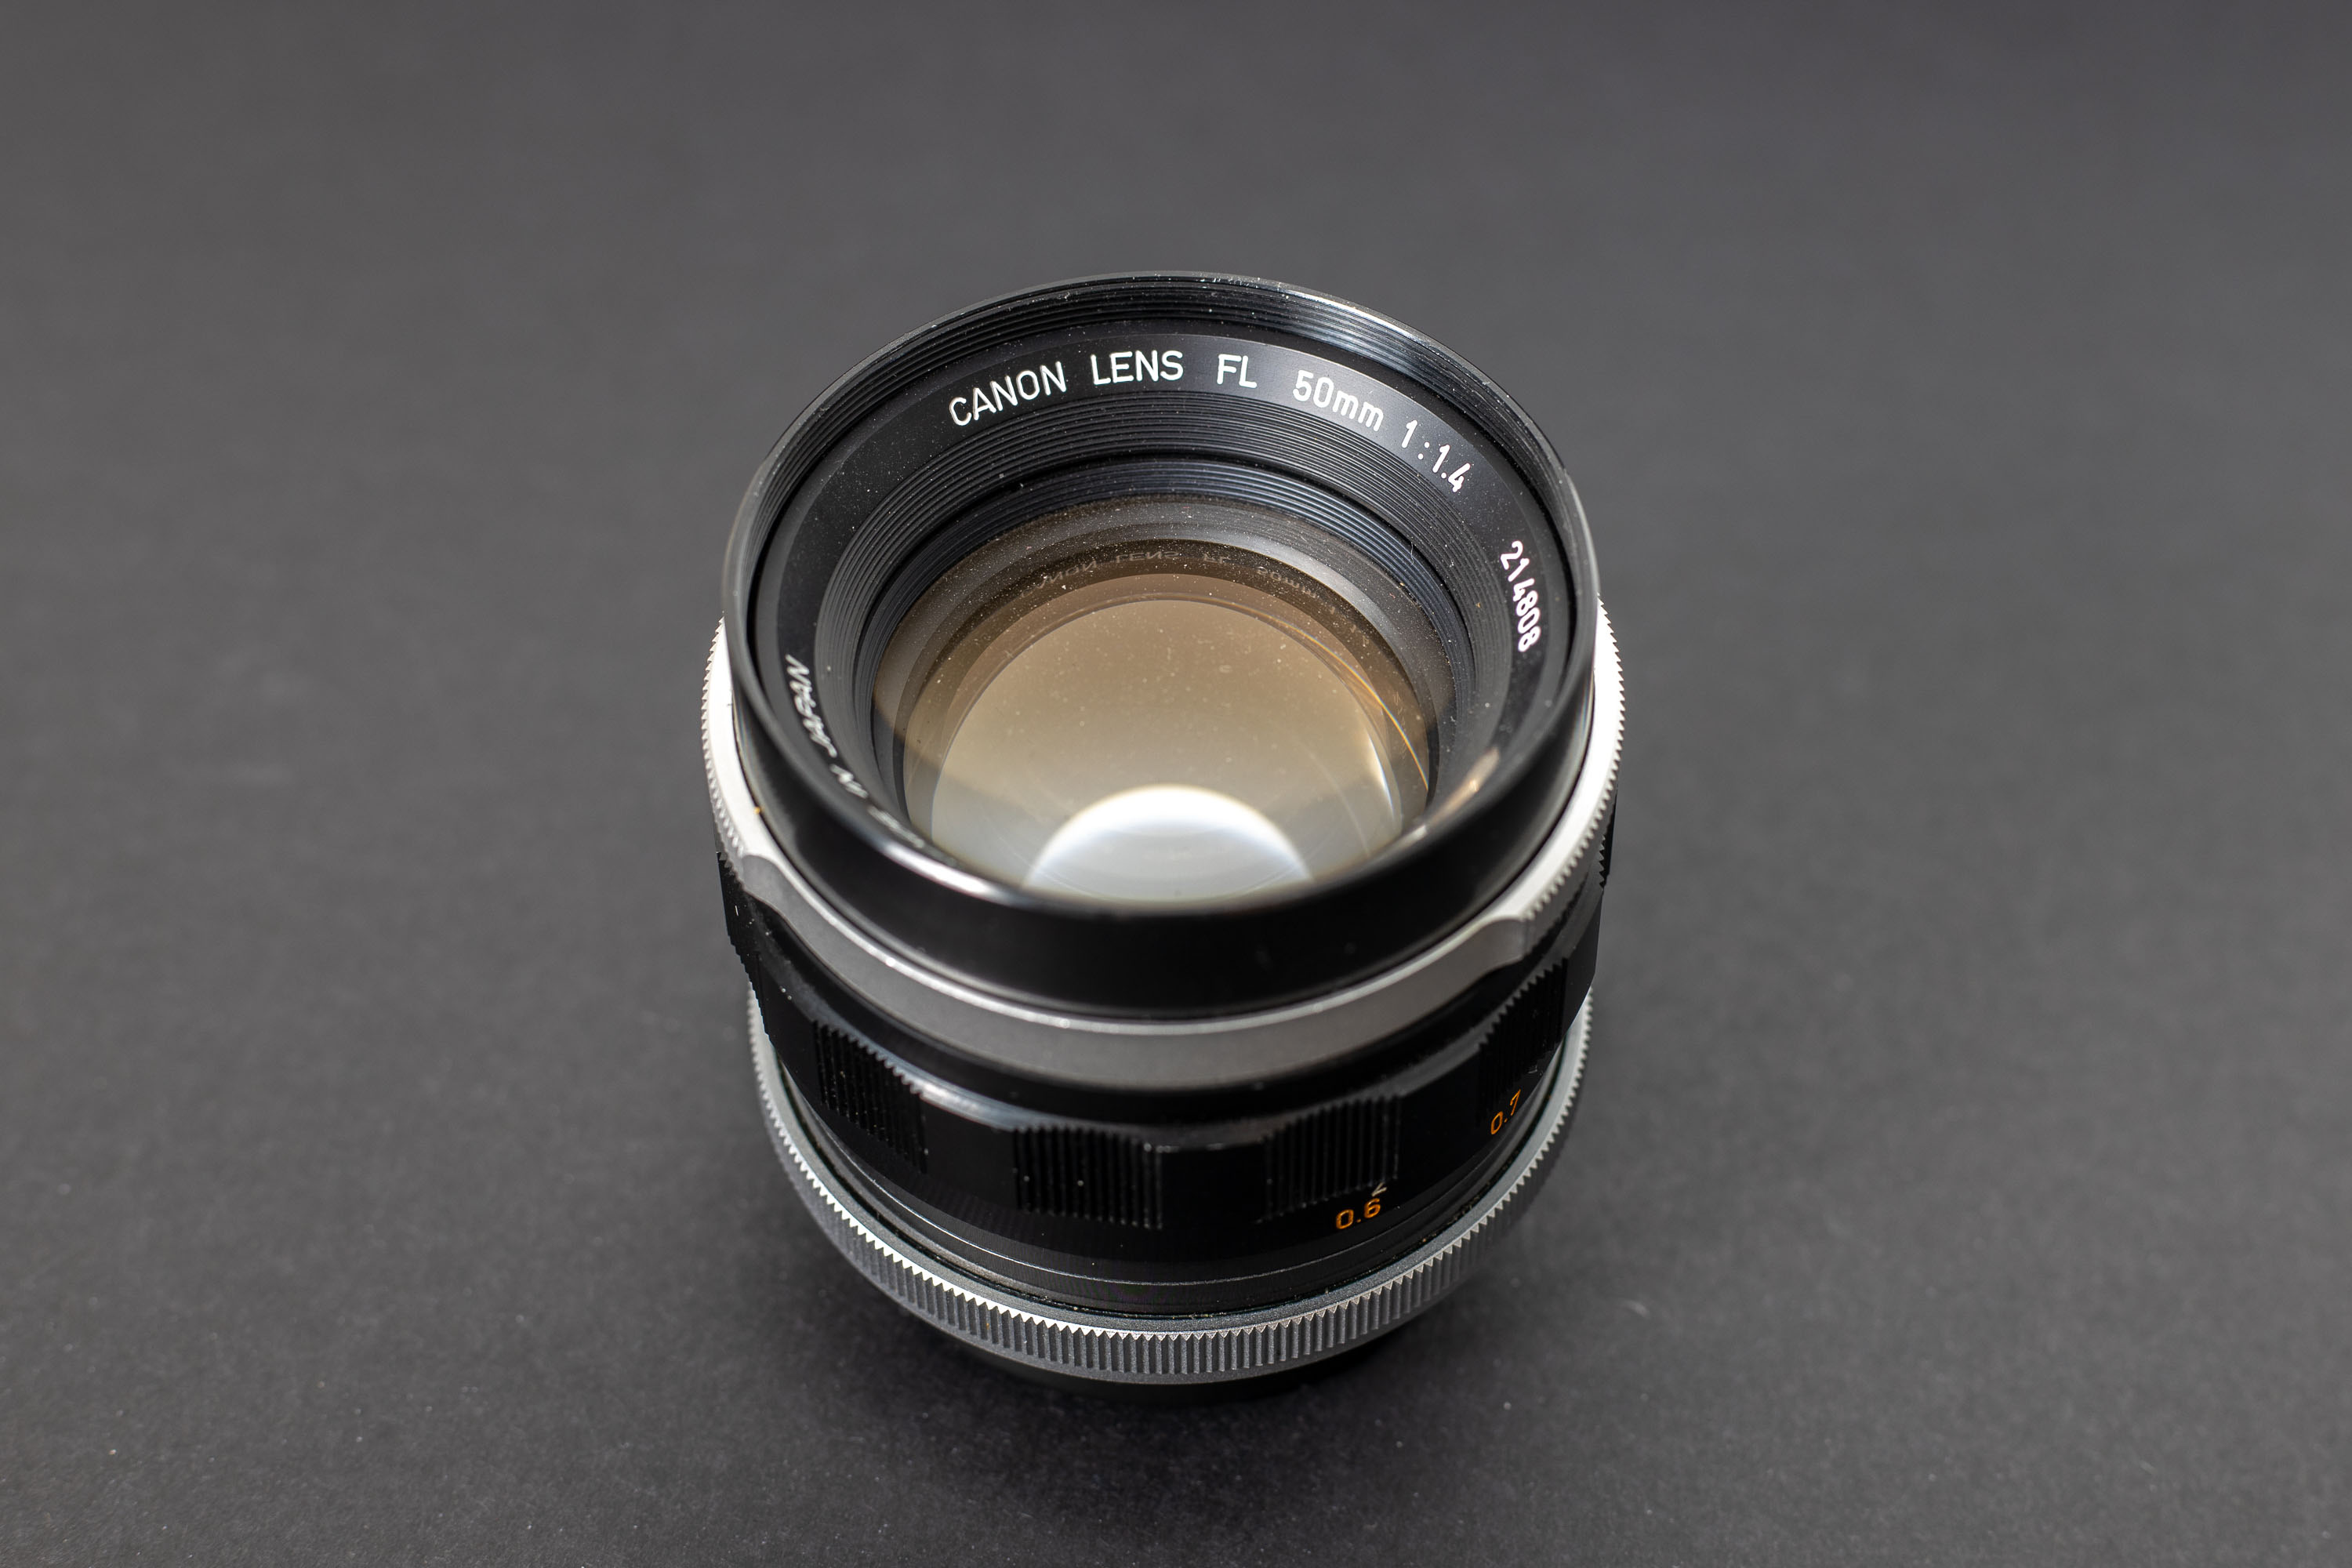 Canon FL 50mm f1.4 - Aperture selection ring details